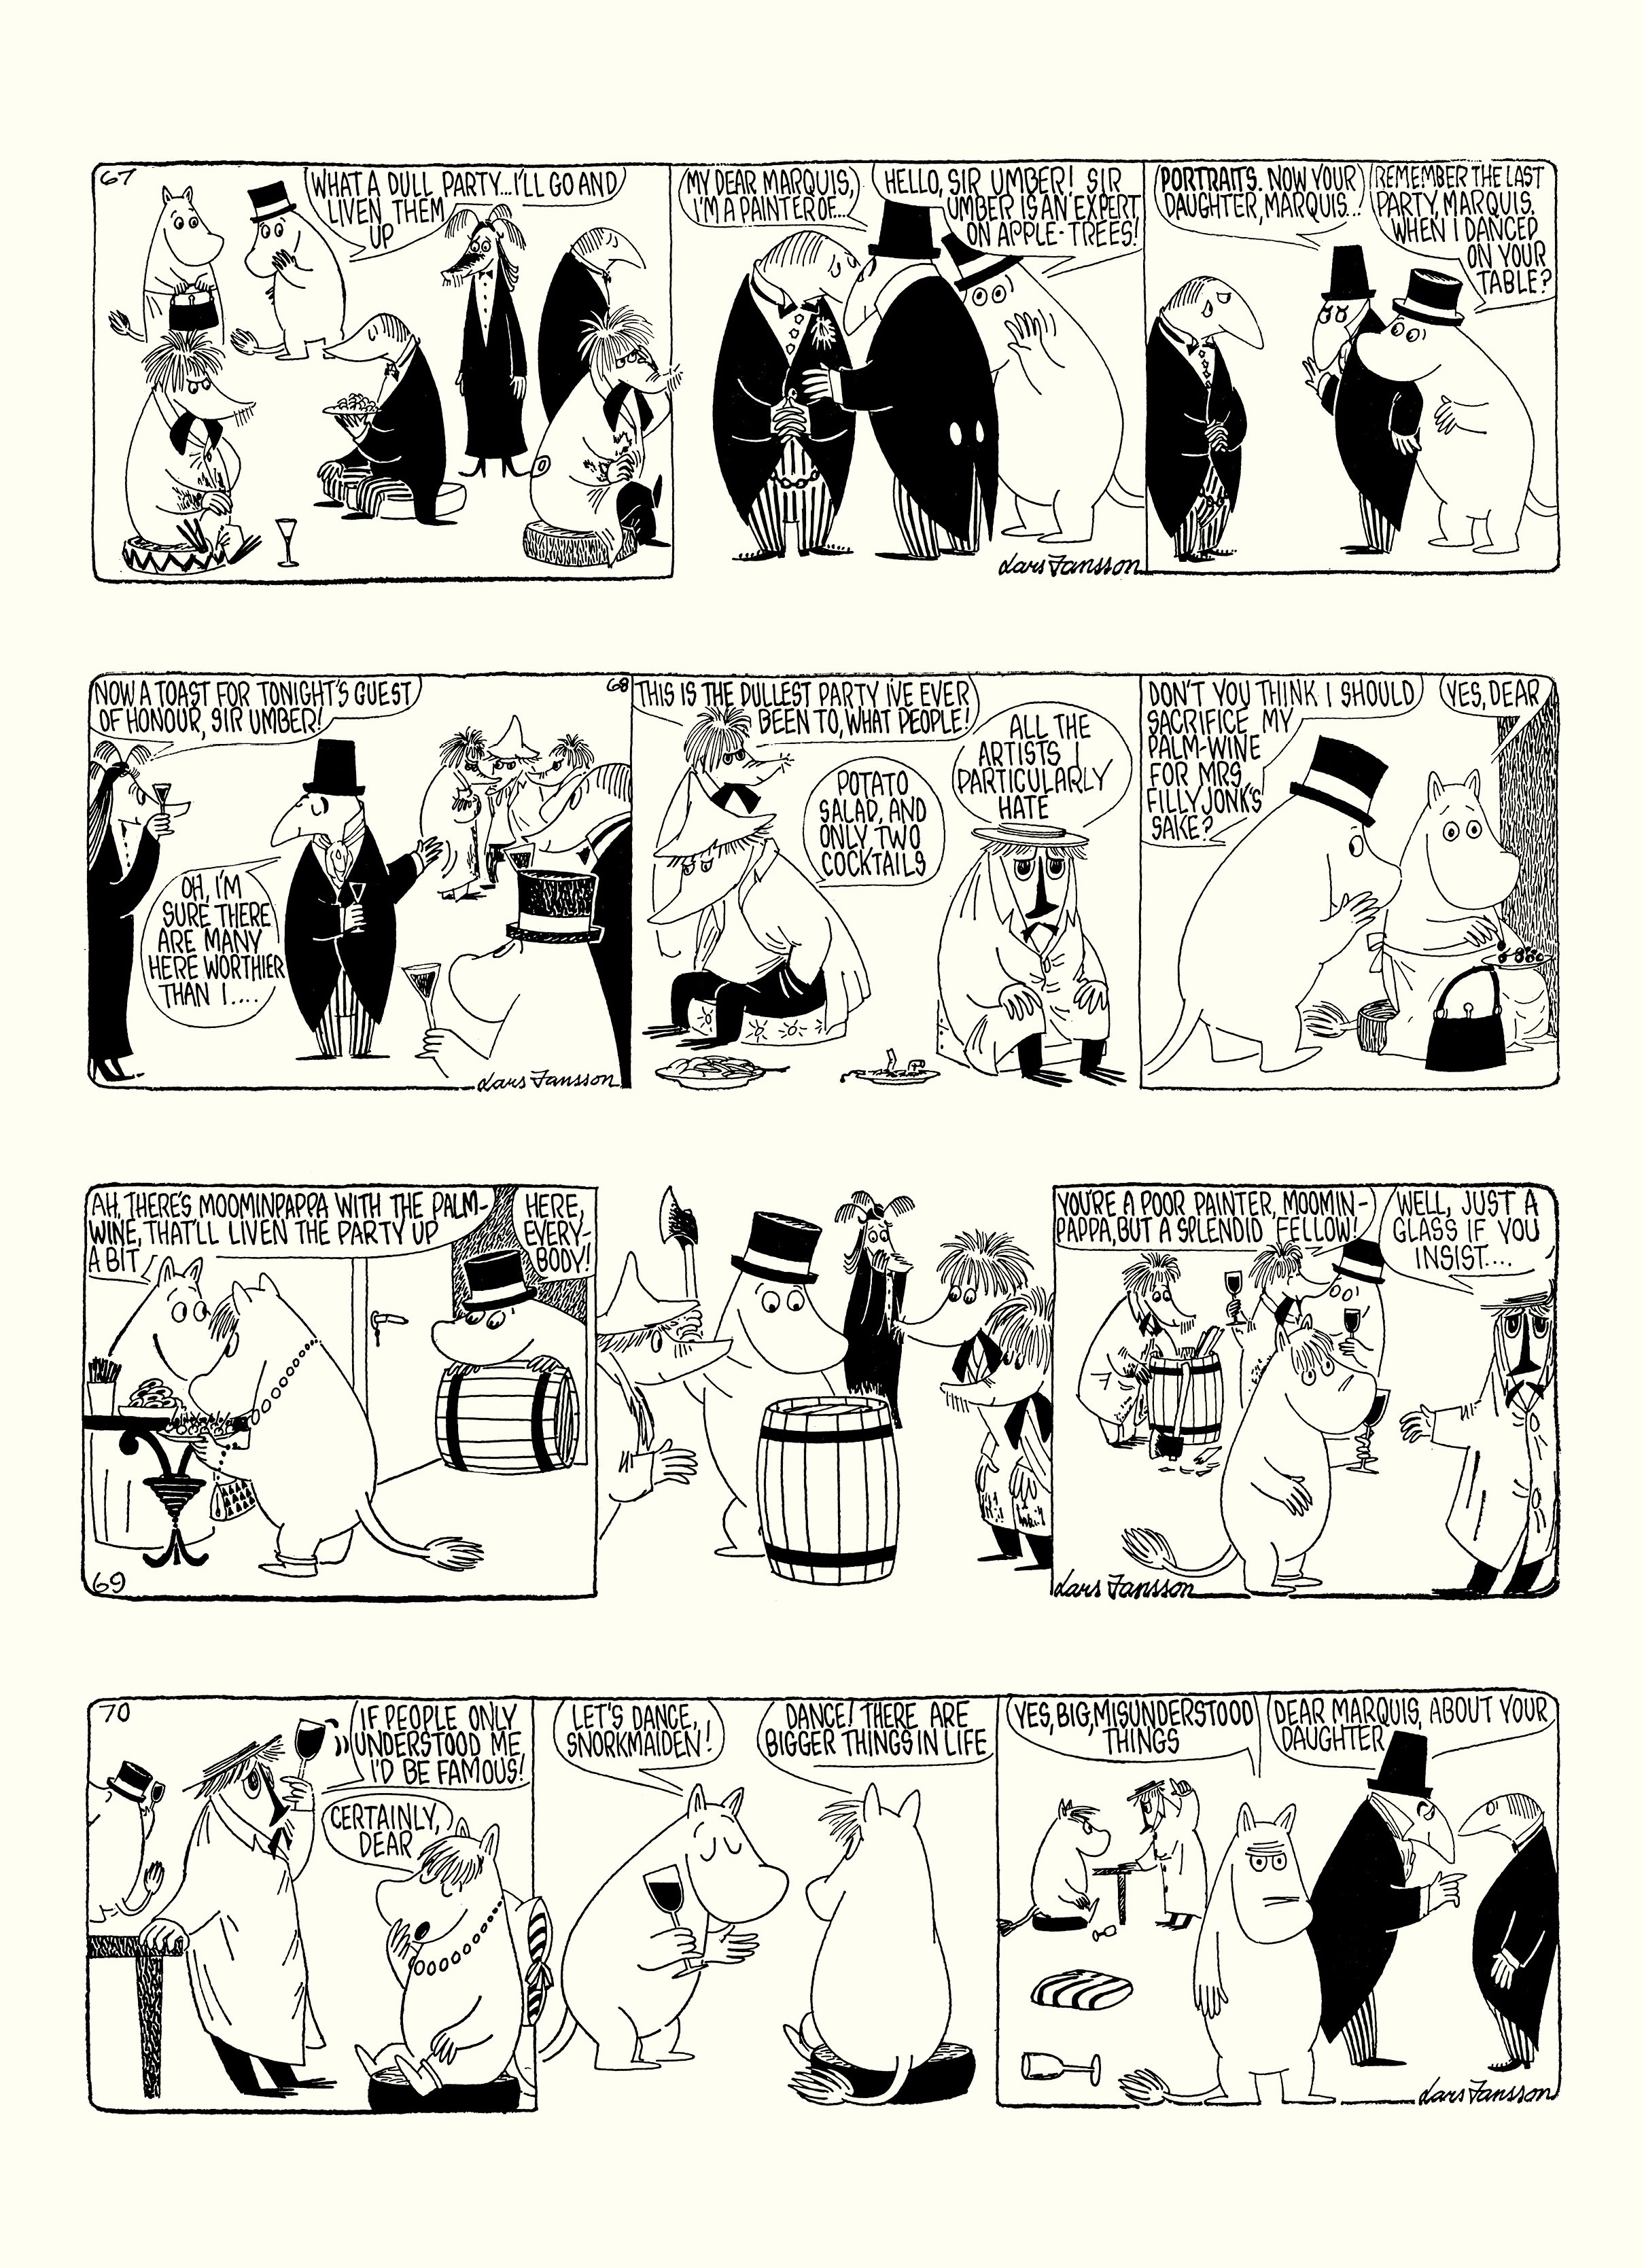 Read online Moomin: The Complete Lars Jansson Comic Strip comic -  Issue # TPB 8 - 44